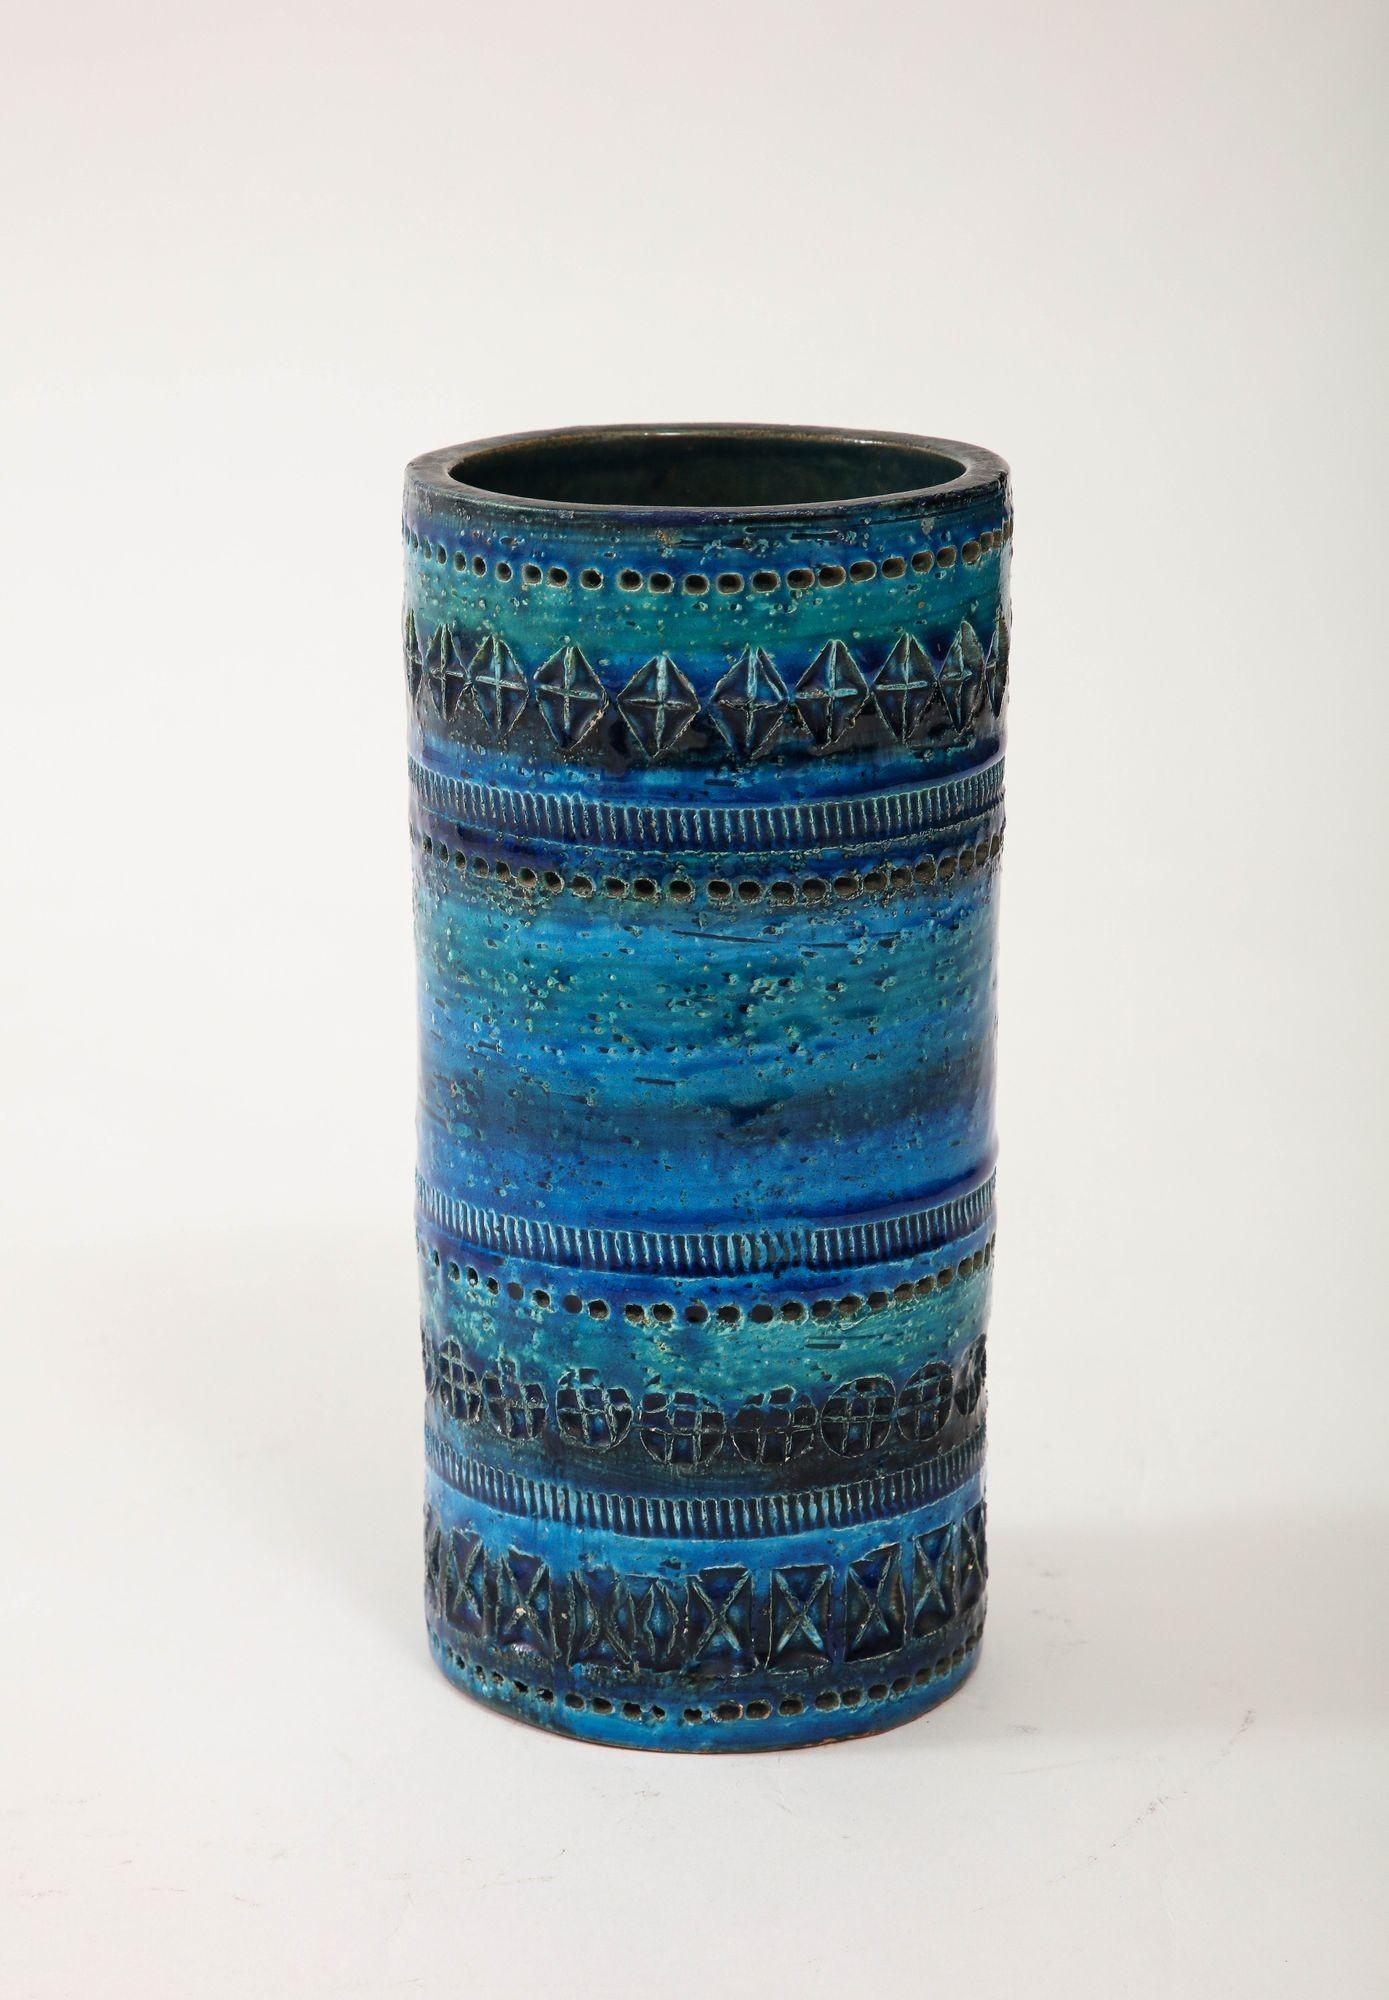 This Bitossi Ceramic Cylindrical Vase, crafted circa 1960, is an exquisite example of Italian ceramic artistry. Drenched in the alluring 'Rimini blue' glaze, it exudes a timeless charm. The vase's simple yet elegant form serves as a canvas for